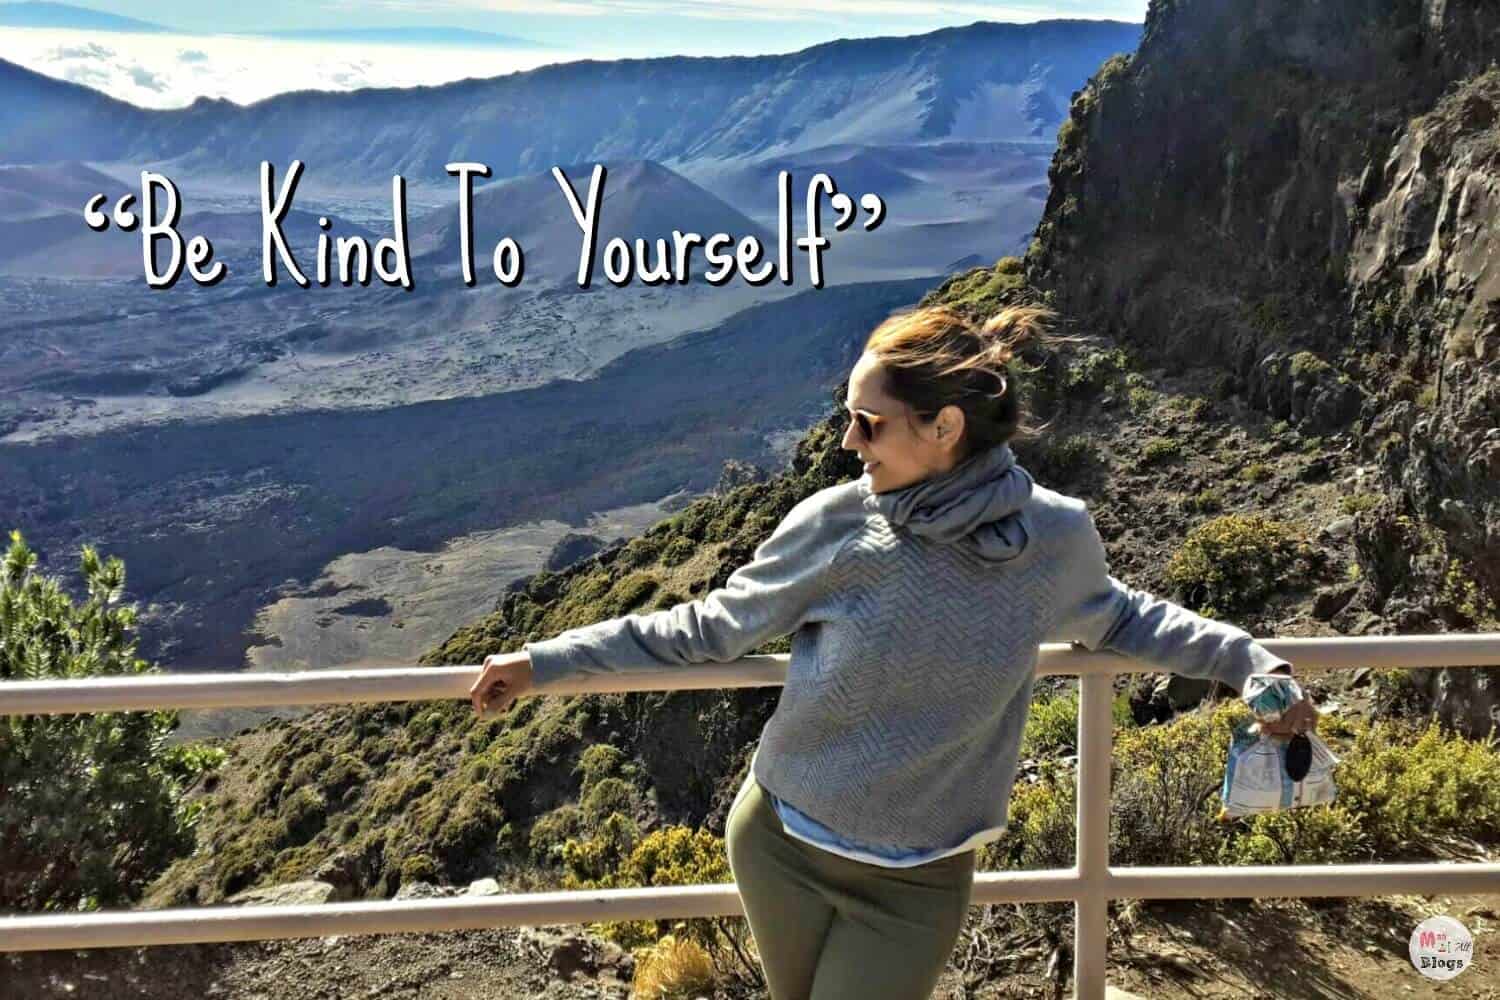 “Be Kind To Yourself”